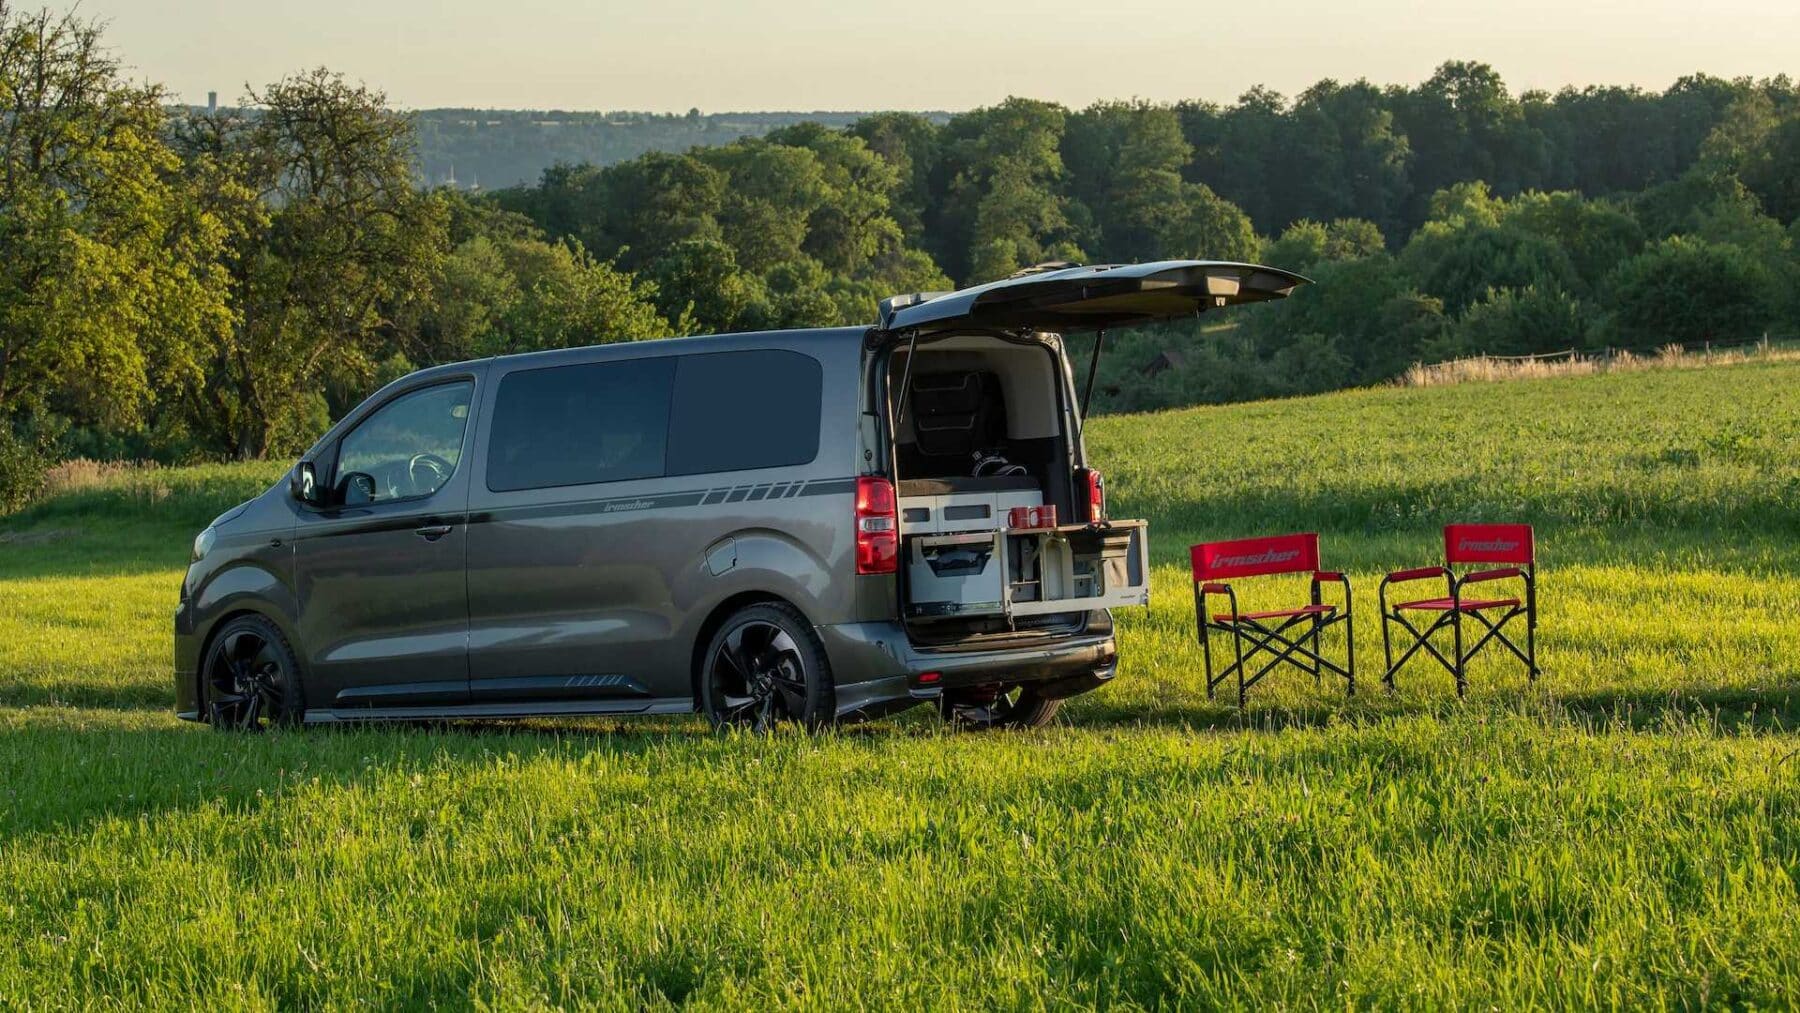 The Opel Zafira Life becomes a camper with a sportier touch